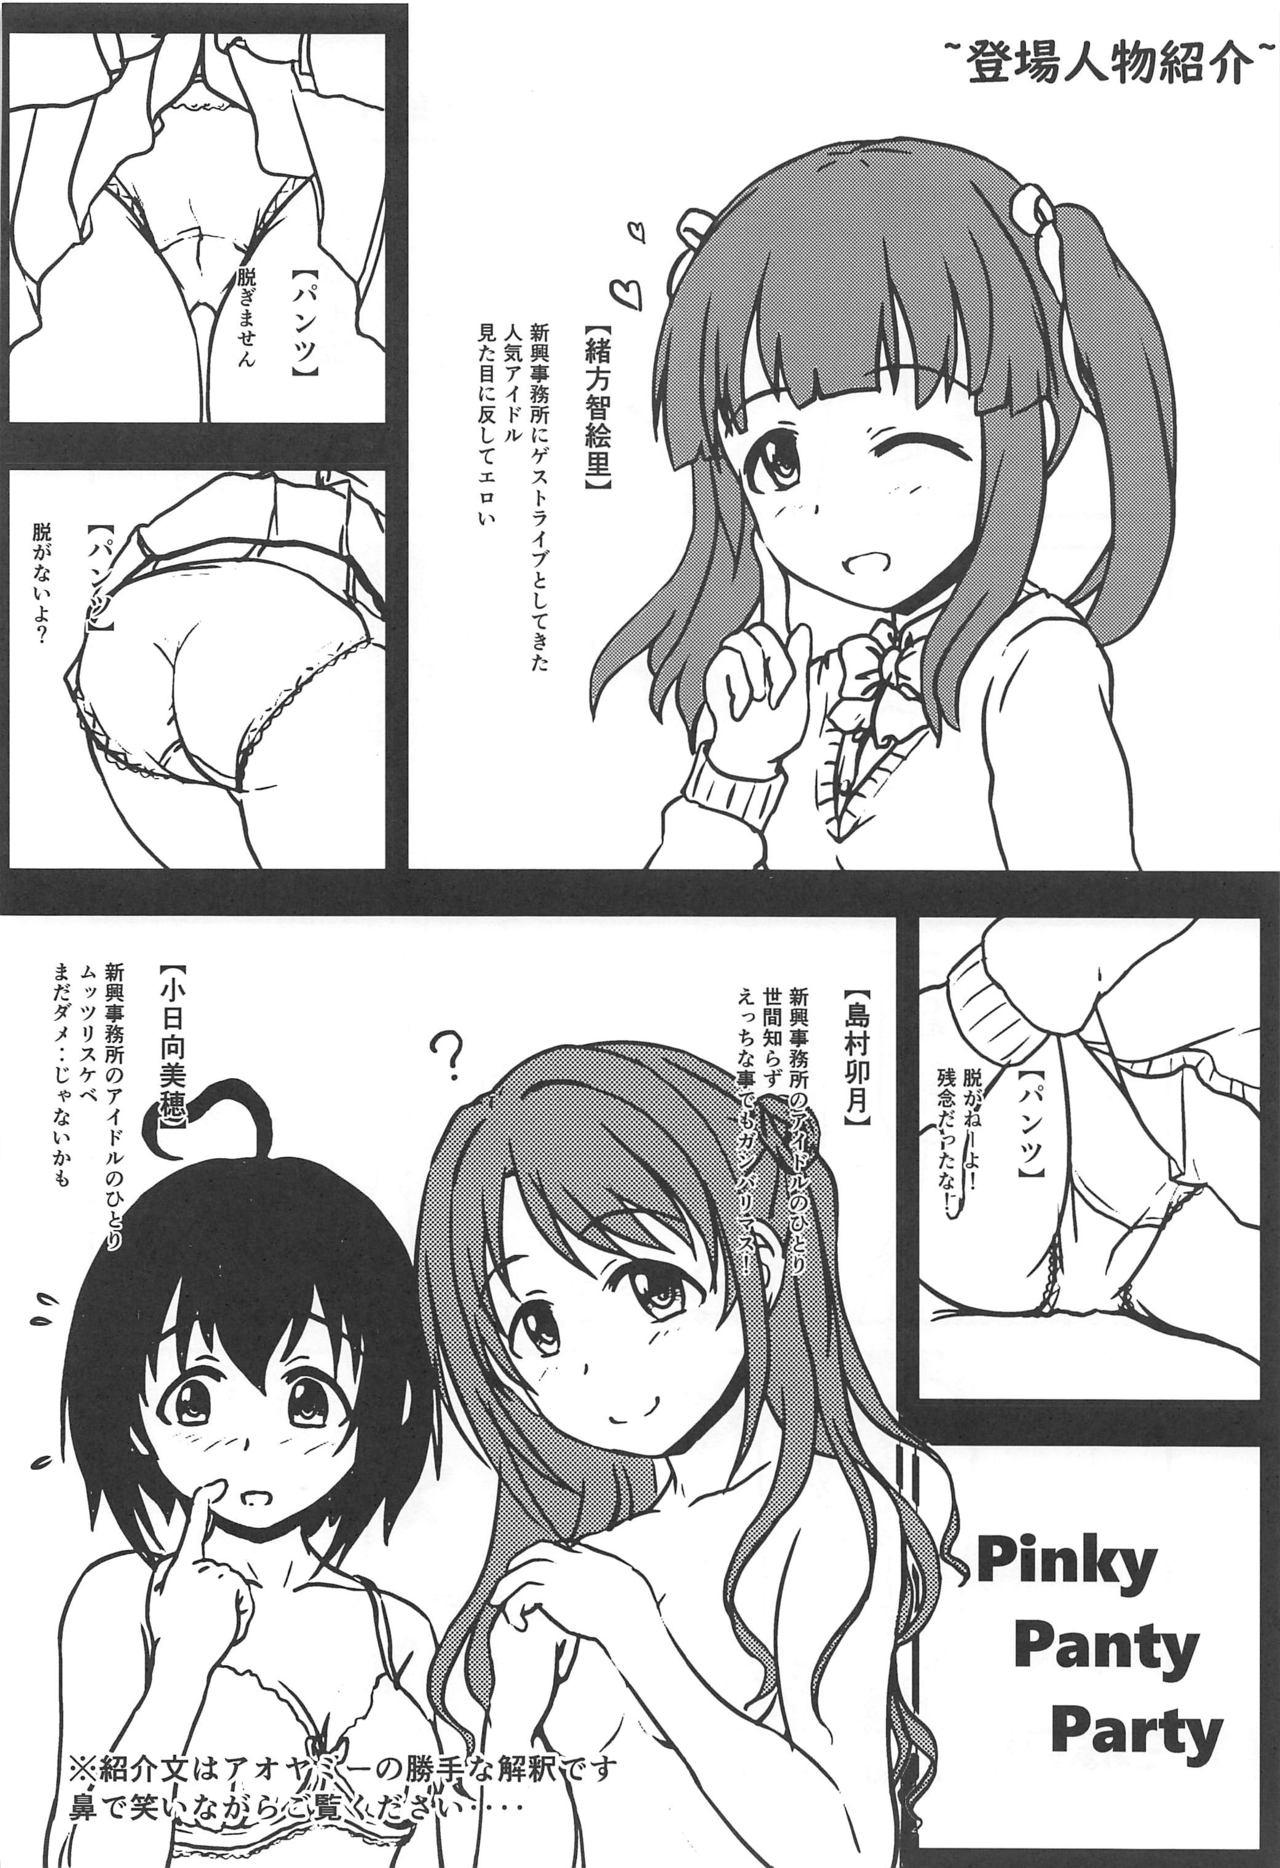 Instagram Pinky Panty Party - The idolmaster Amateurs Gone - Page 3